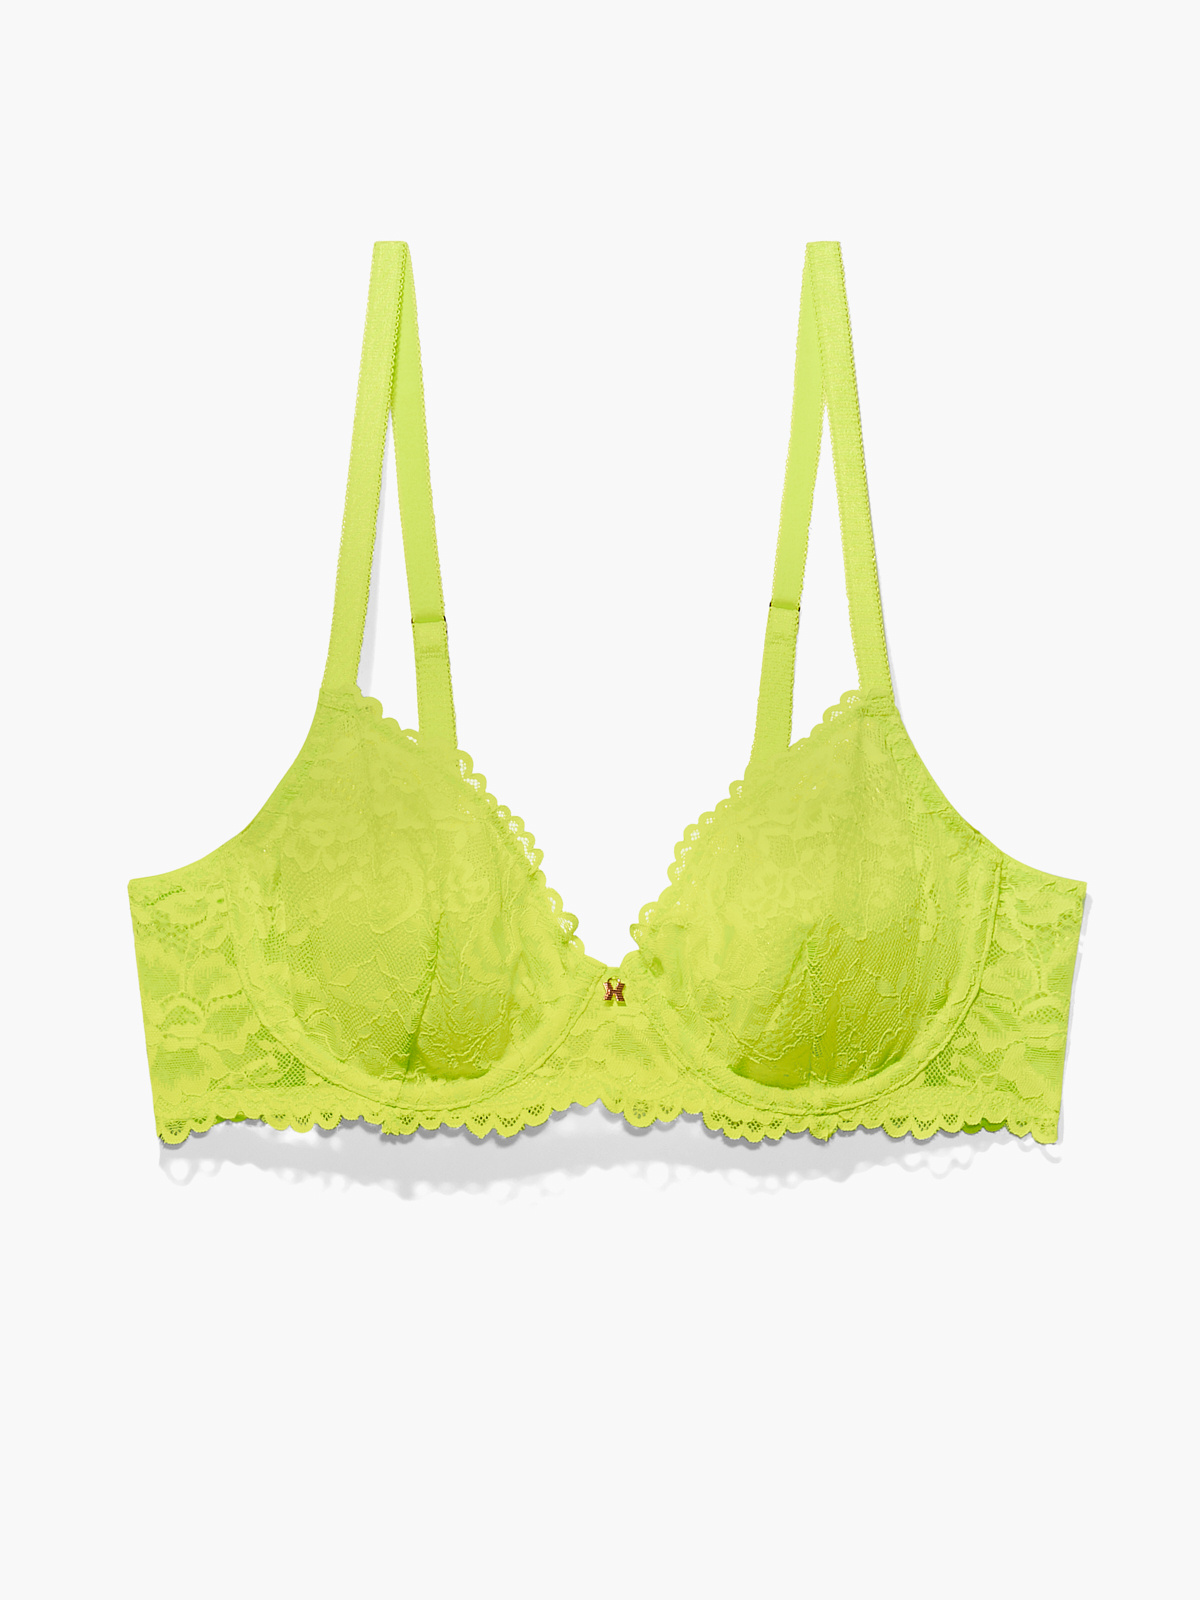 Cacique Smooth Satin Full Coverage Bra 46D Kelly Emerald Green